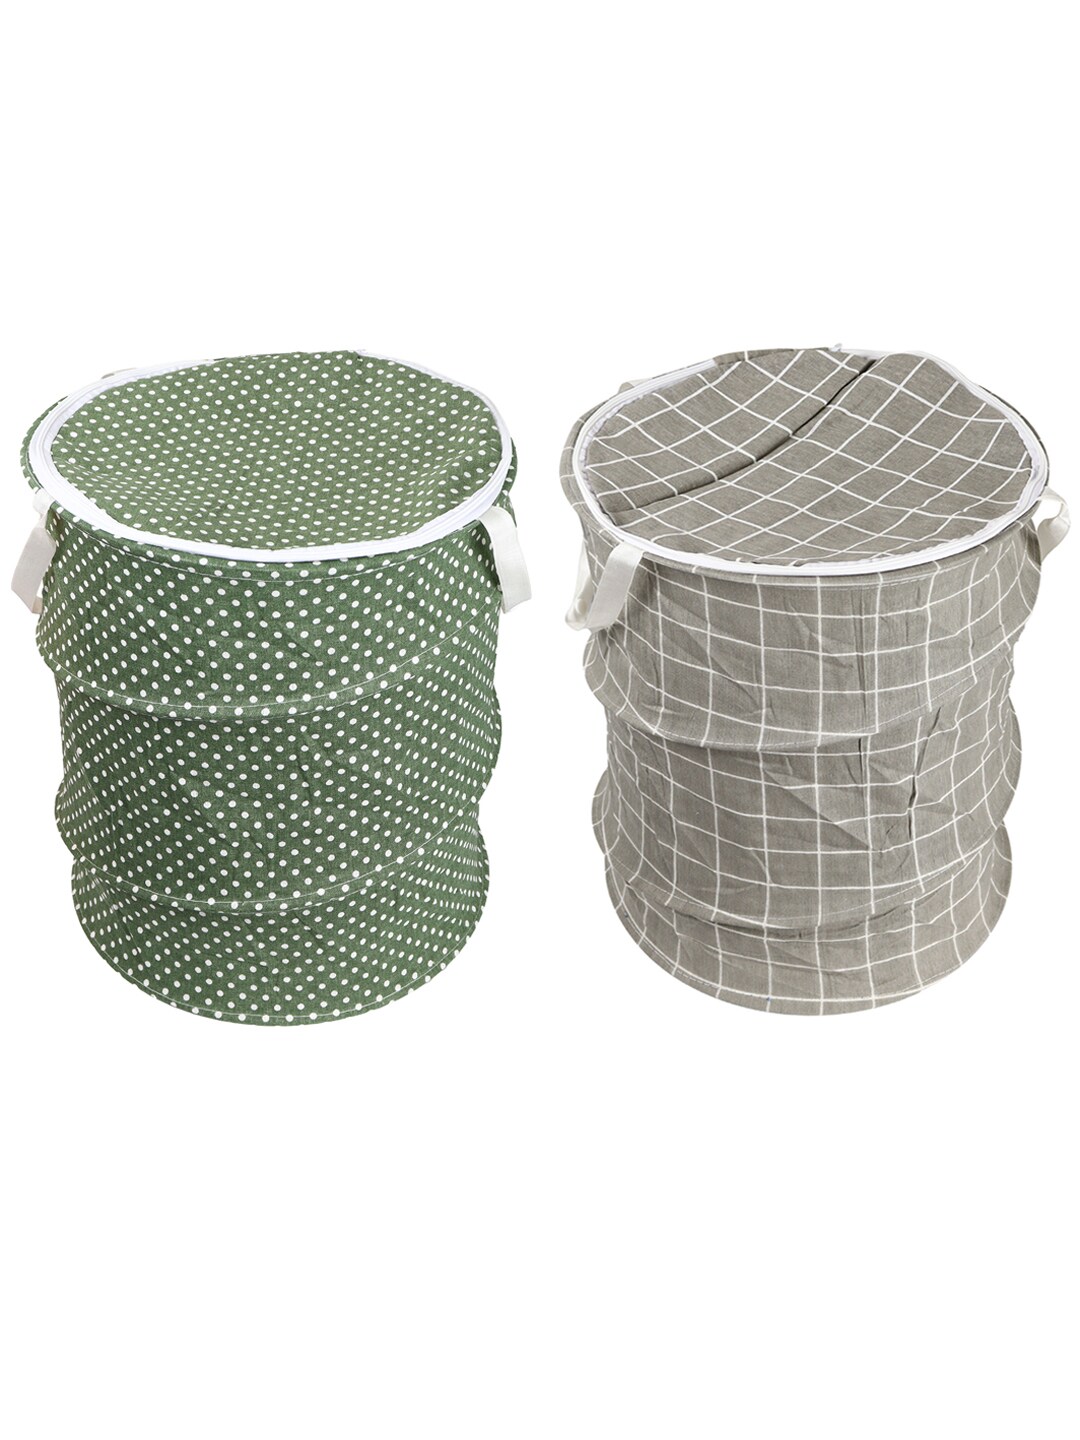 OddCroft Set Of 2 Printed Laundry Basket Price in India